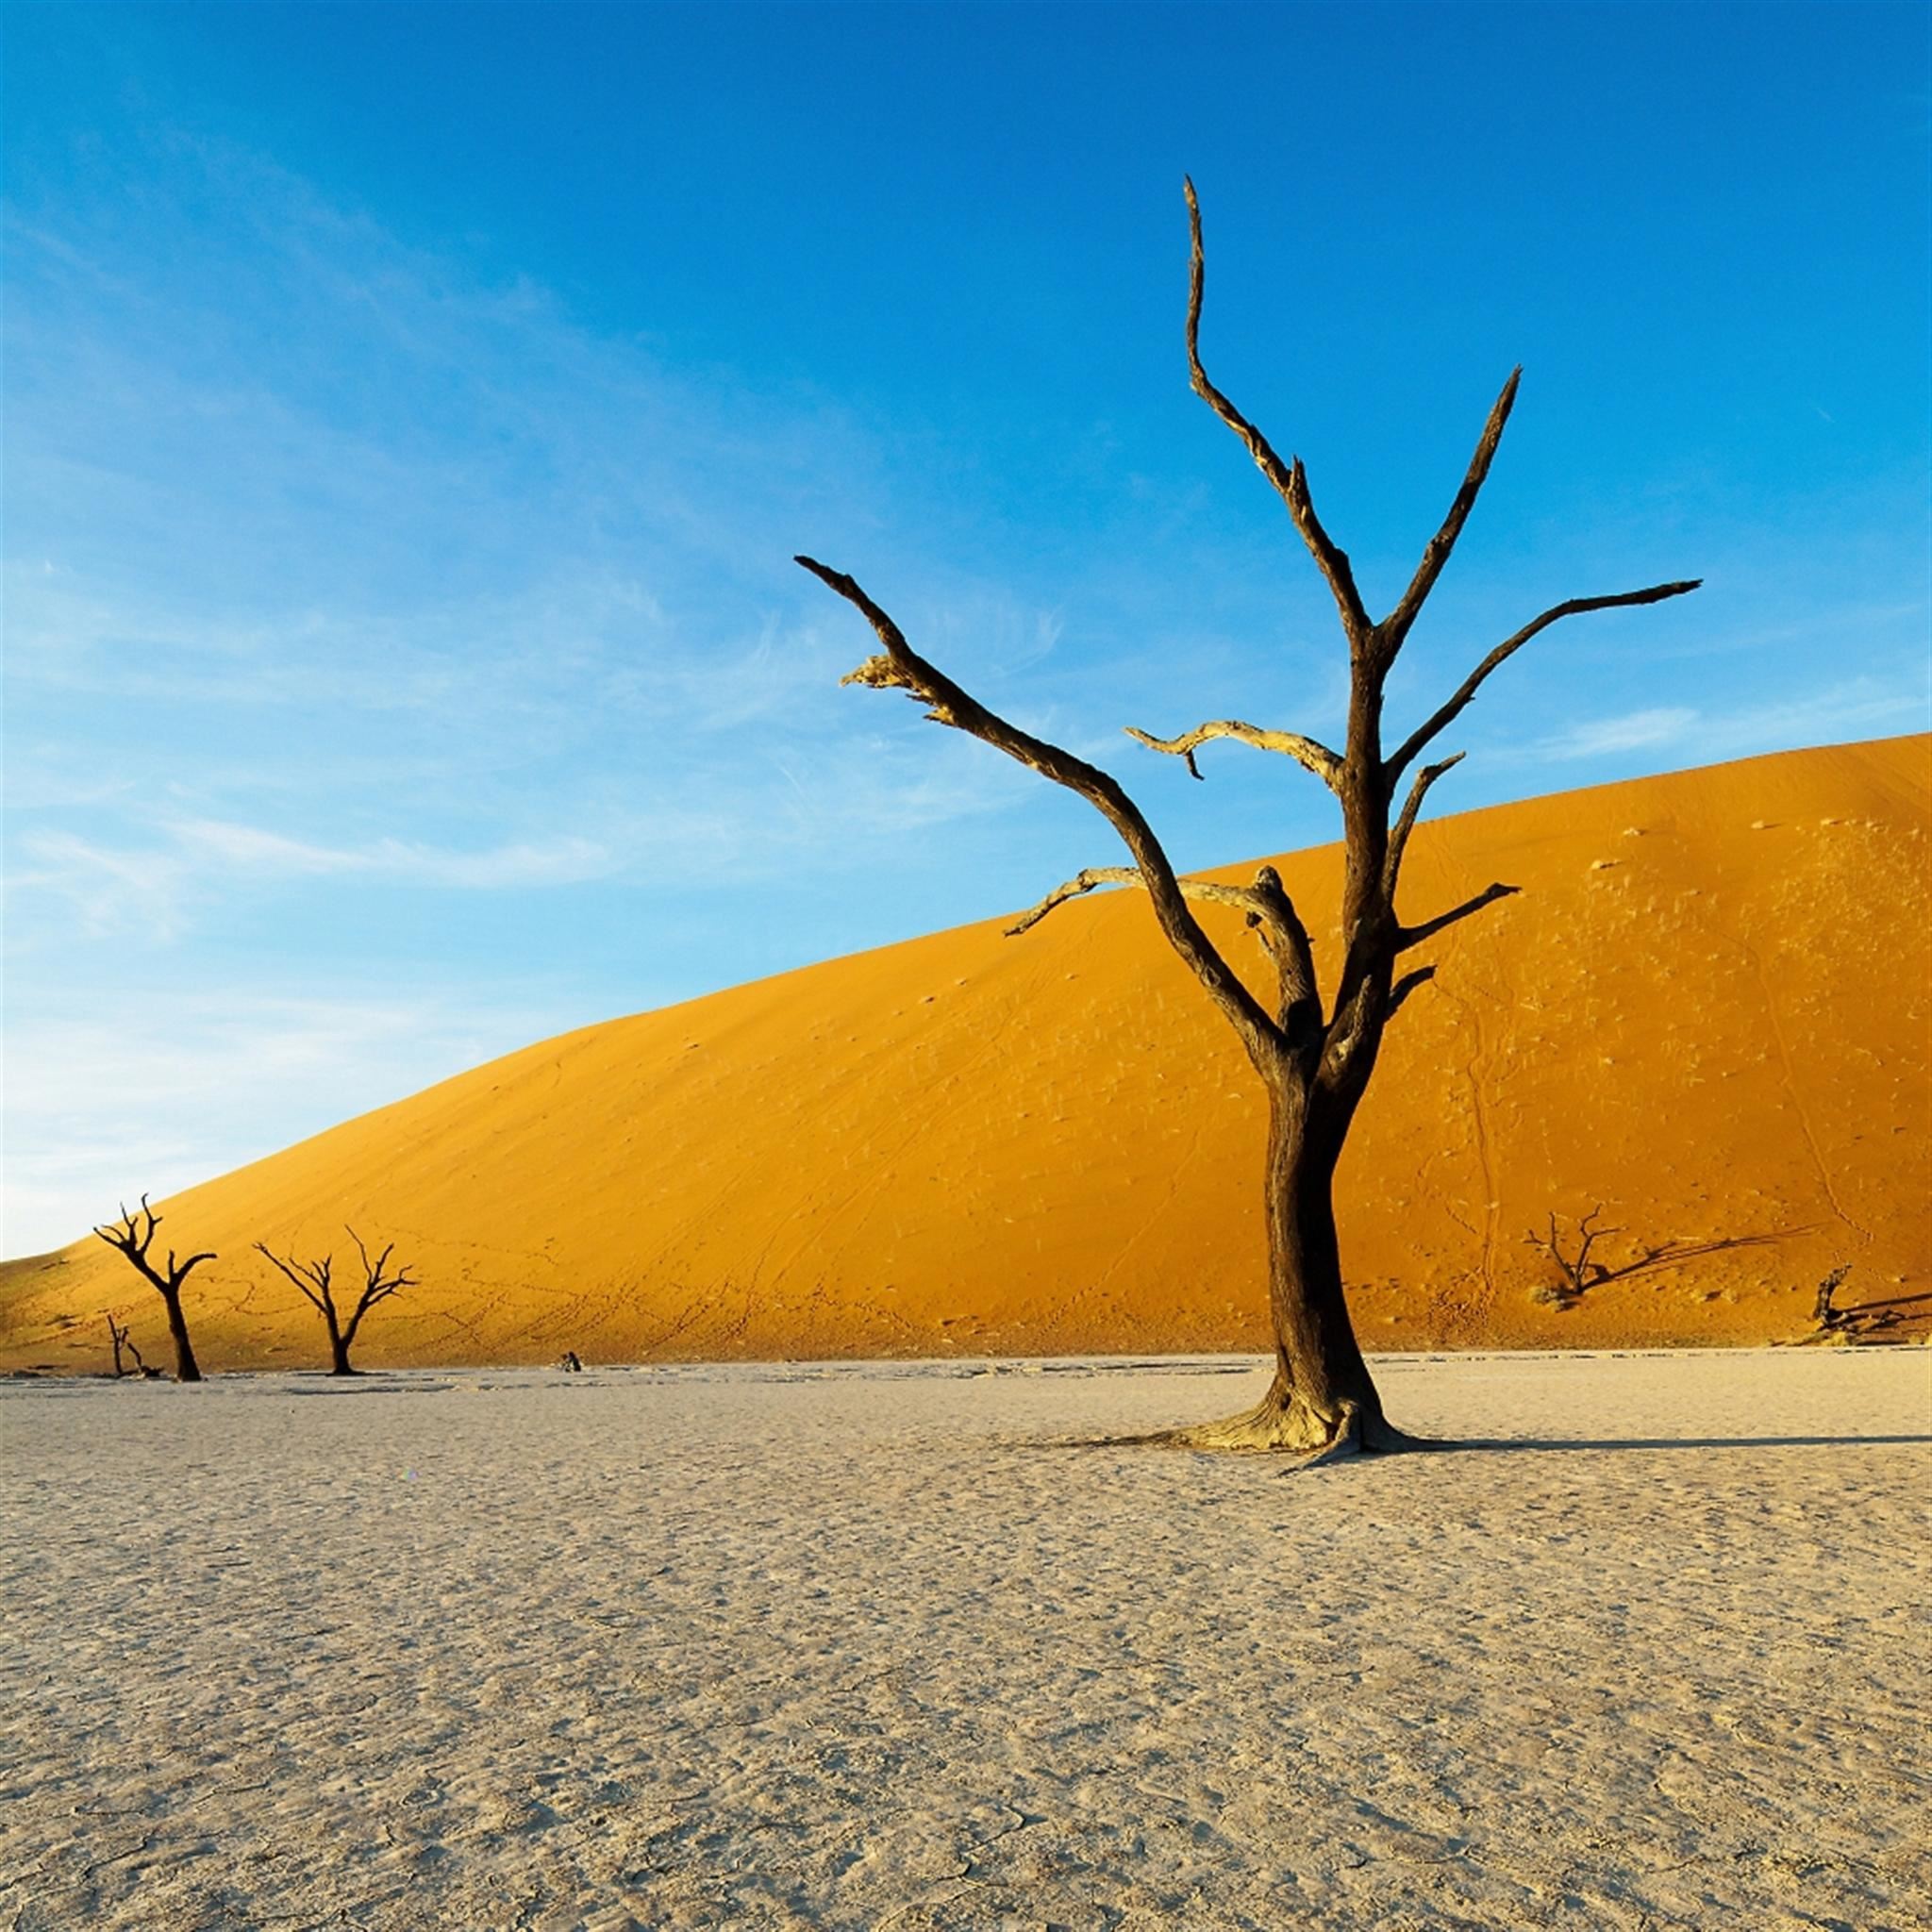 Wither Tree In Desert Land iPad Air wallpaper 